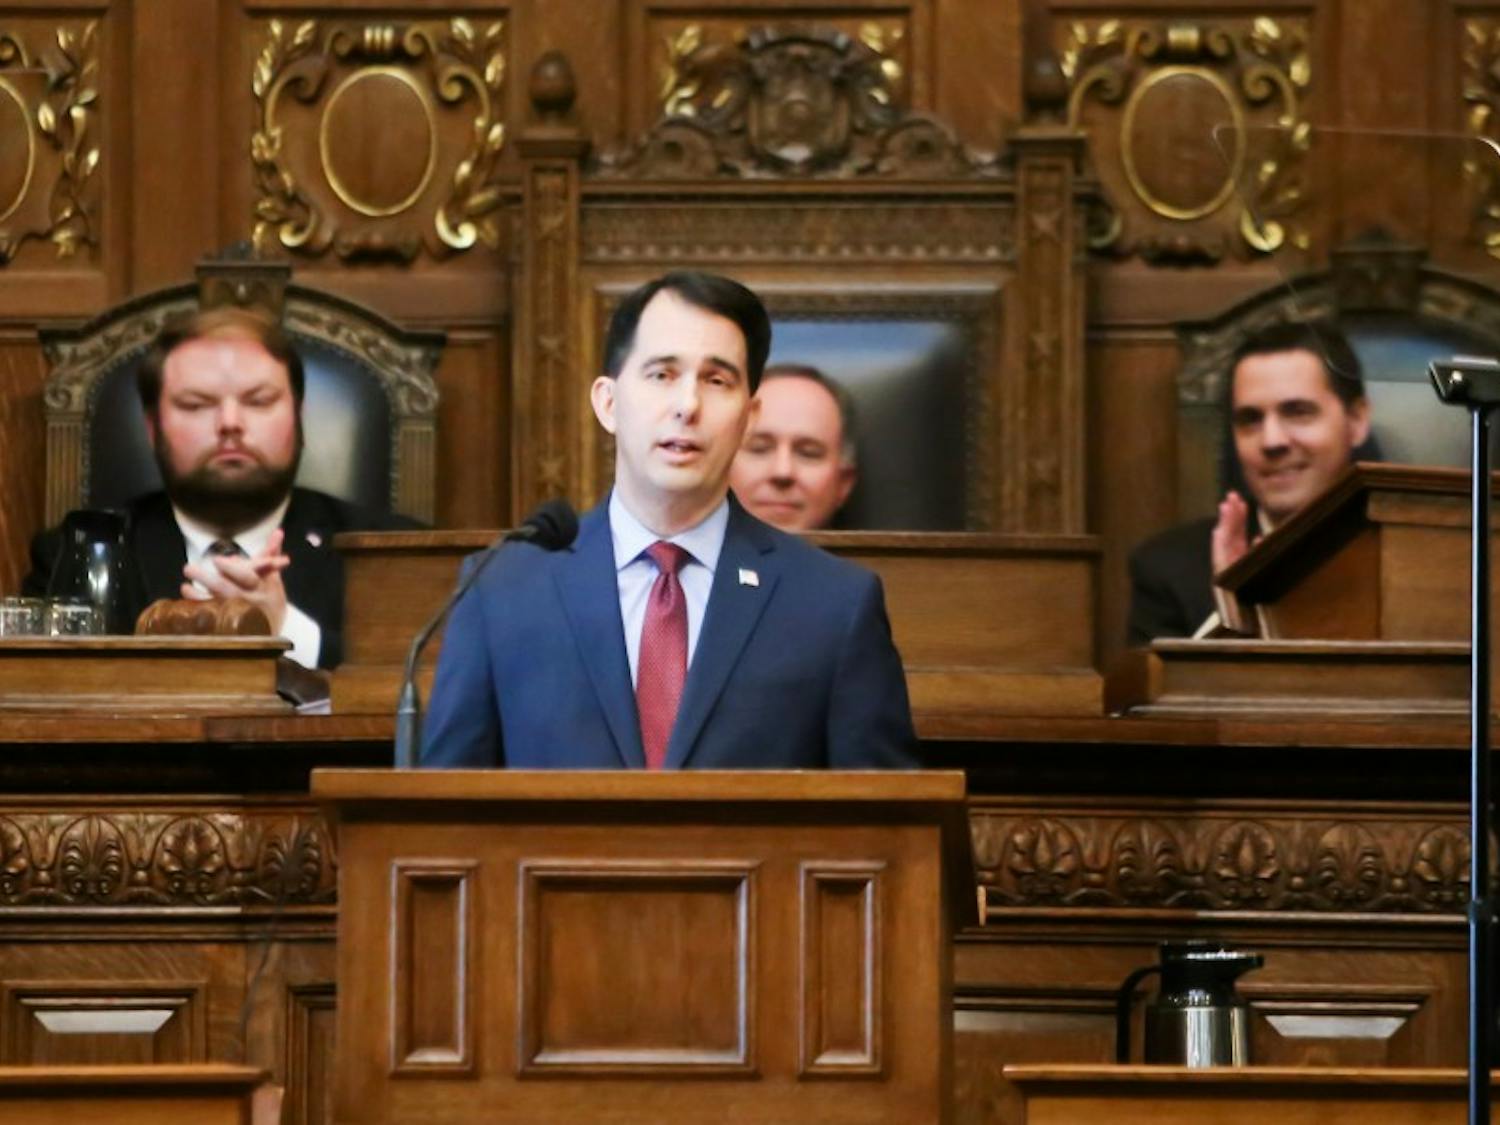 Walker expressed support Wednesday for a bill that would require candidates to lose by one percentage point to in order to request a recount.